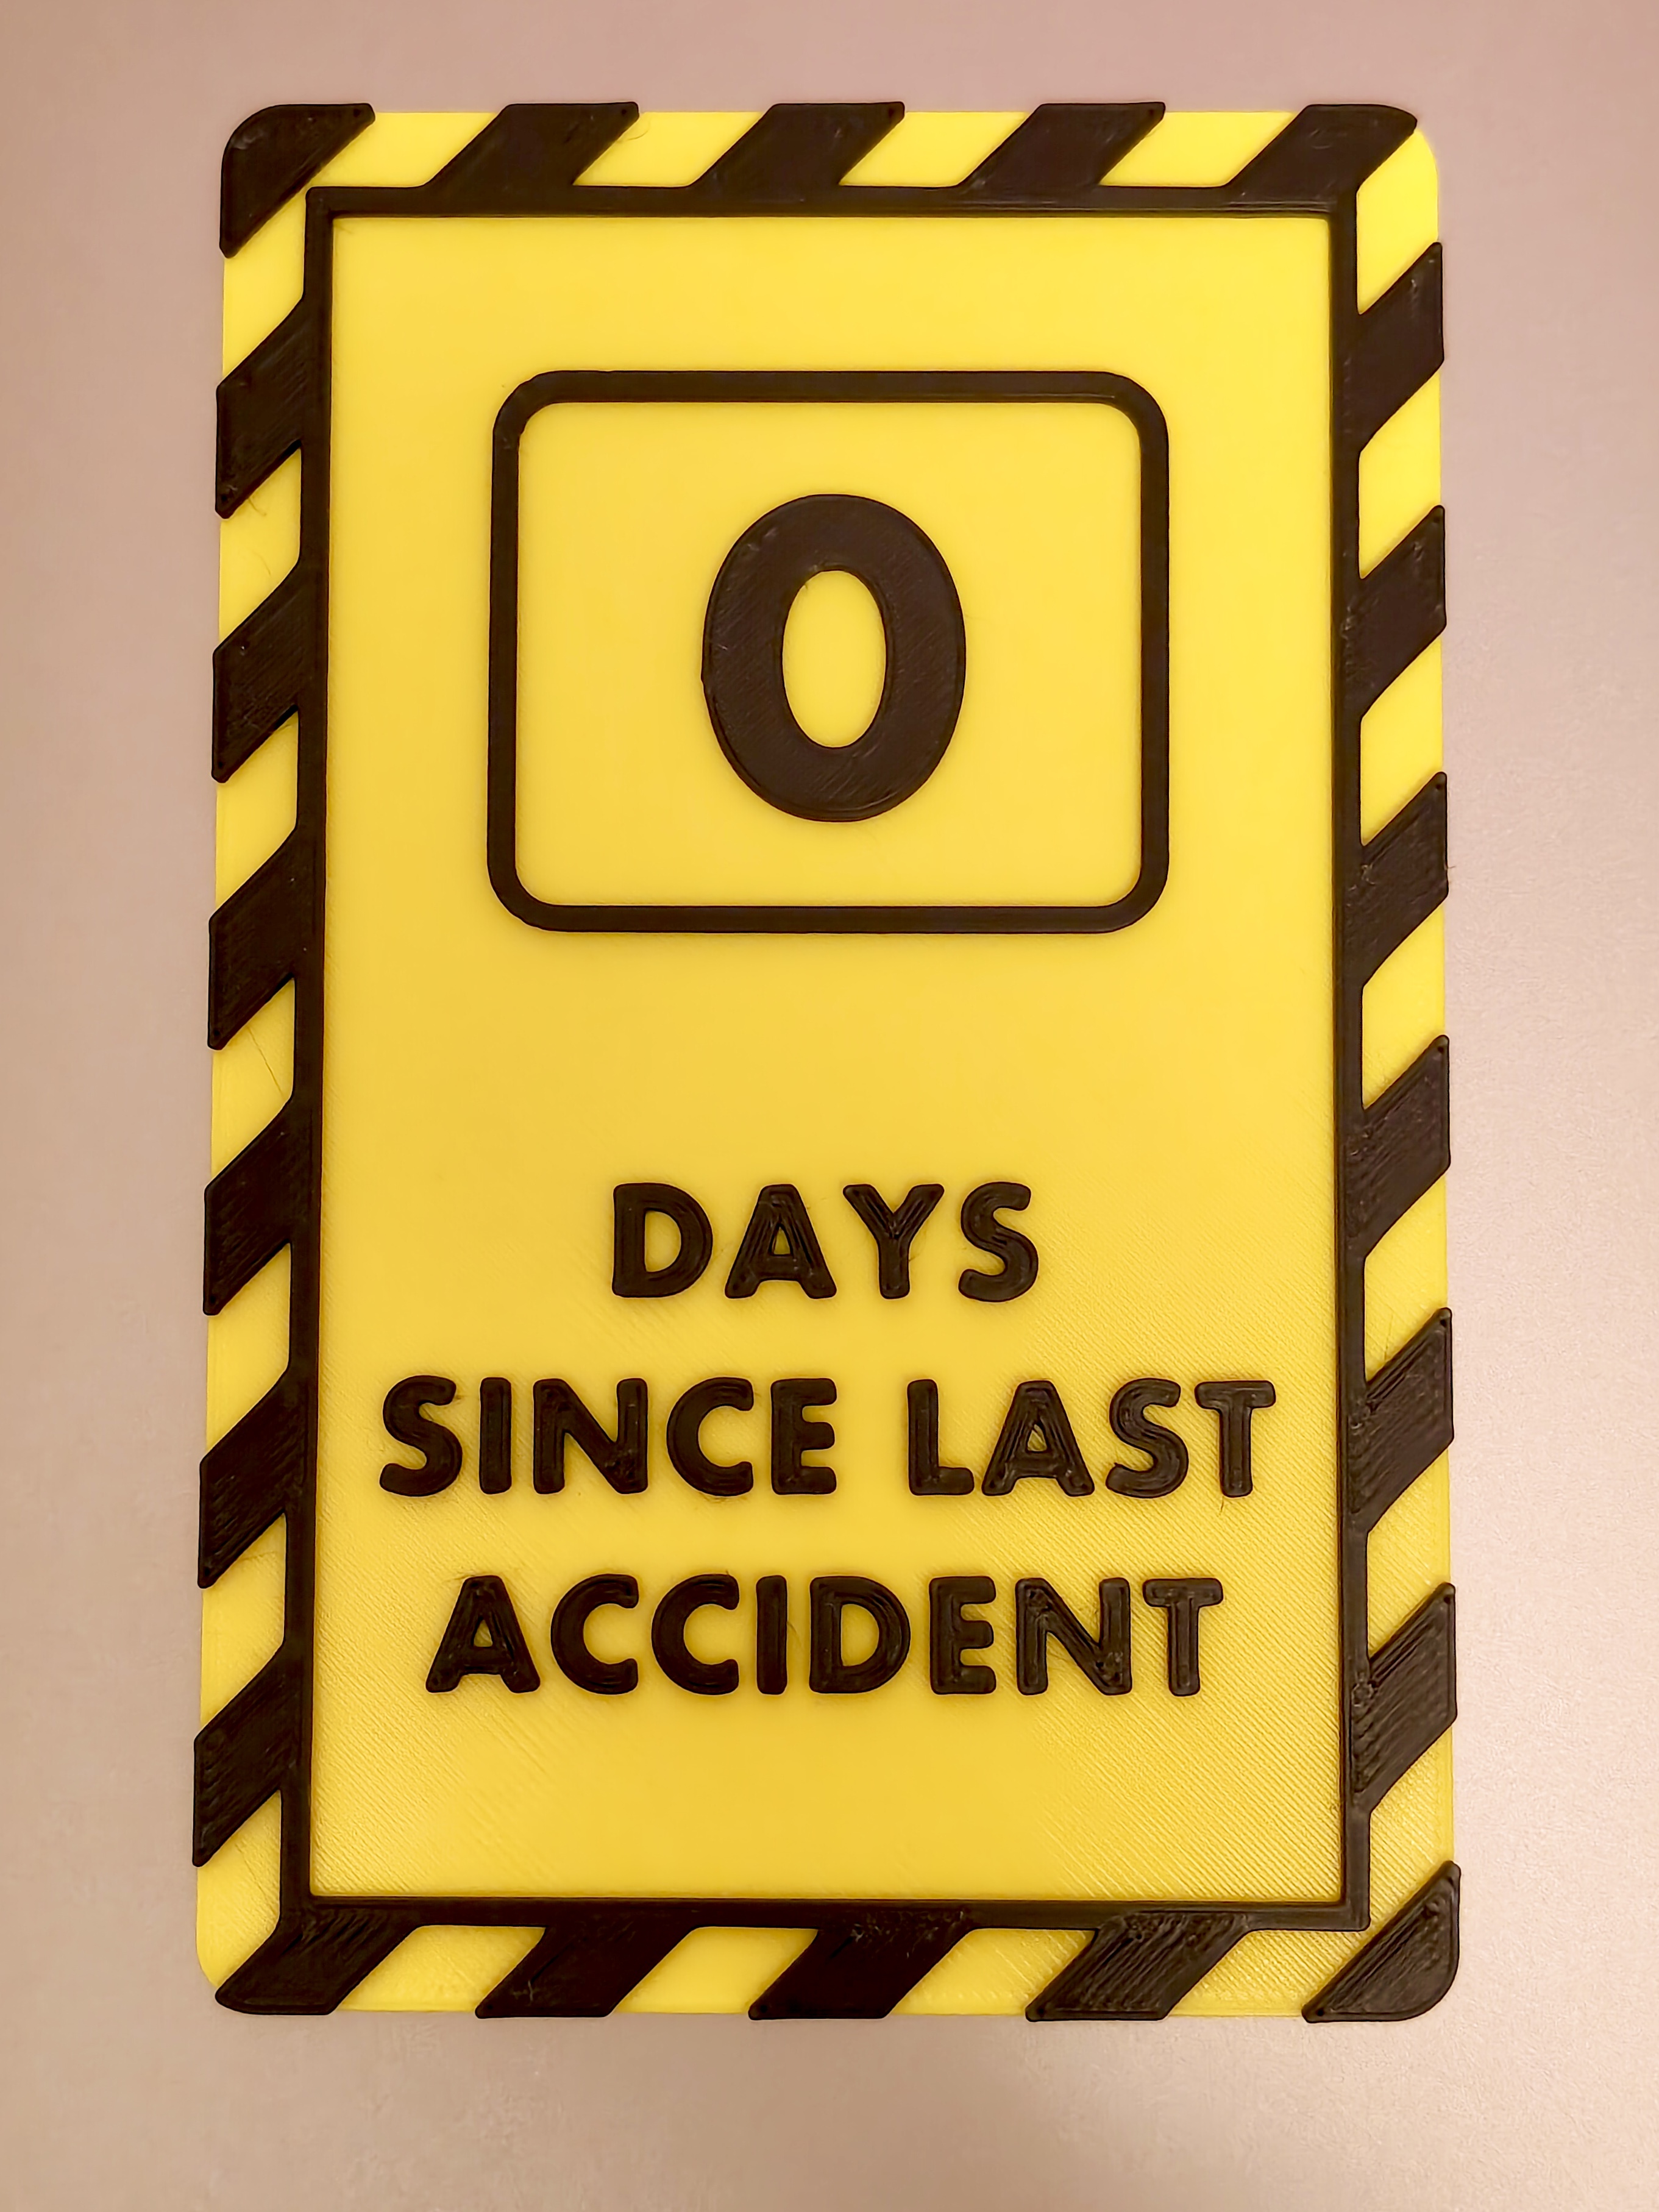 days-since-last-accident-sign-multi-color-no-mmu-ams-required-by